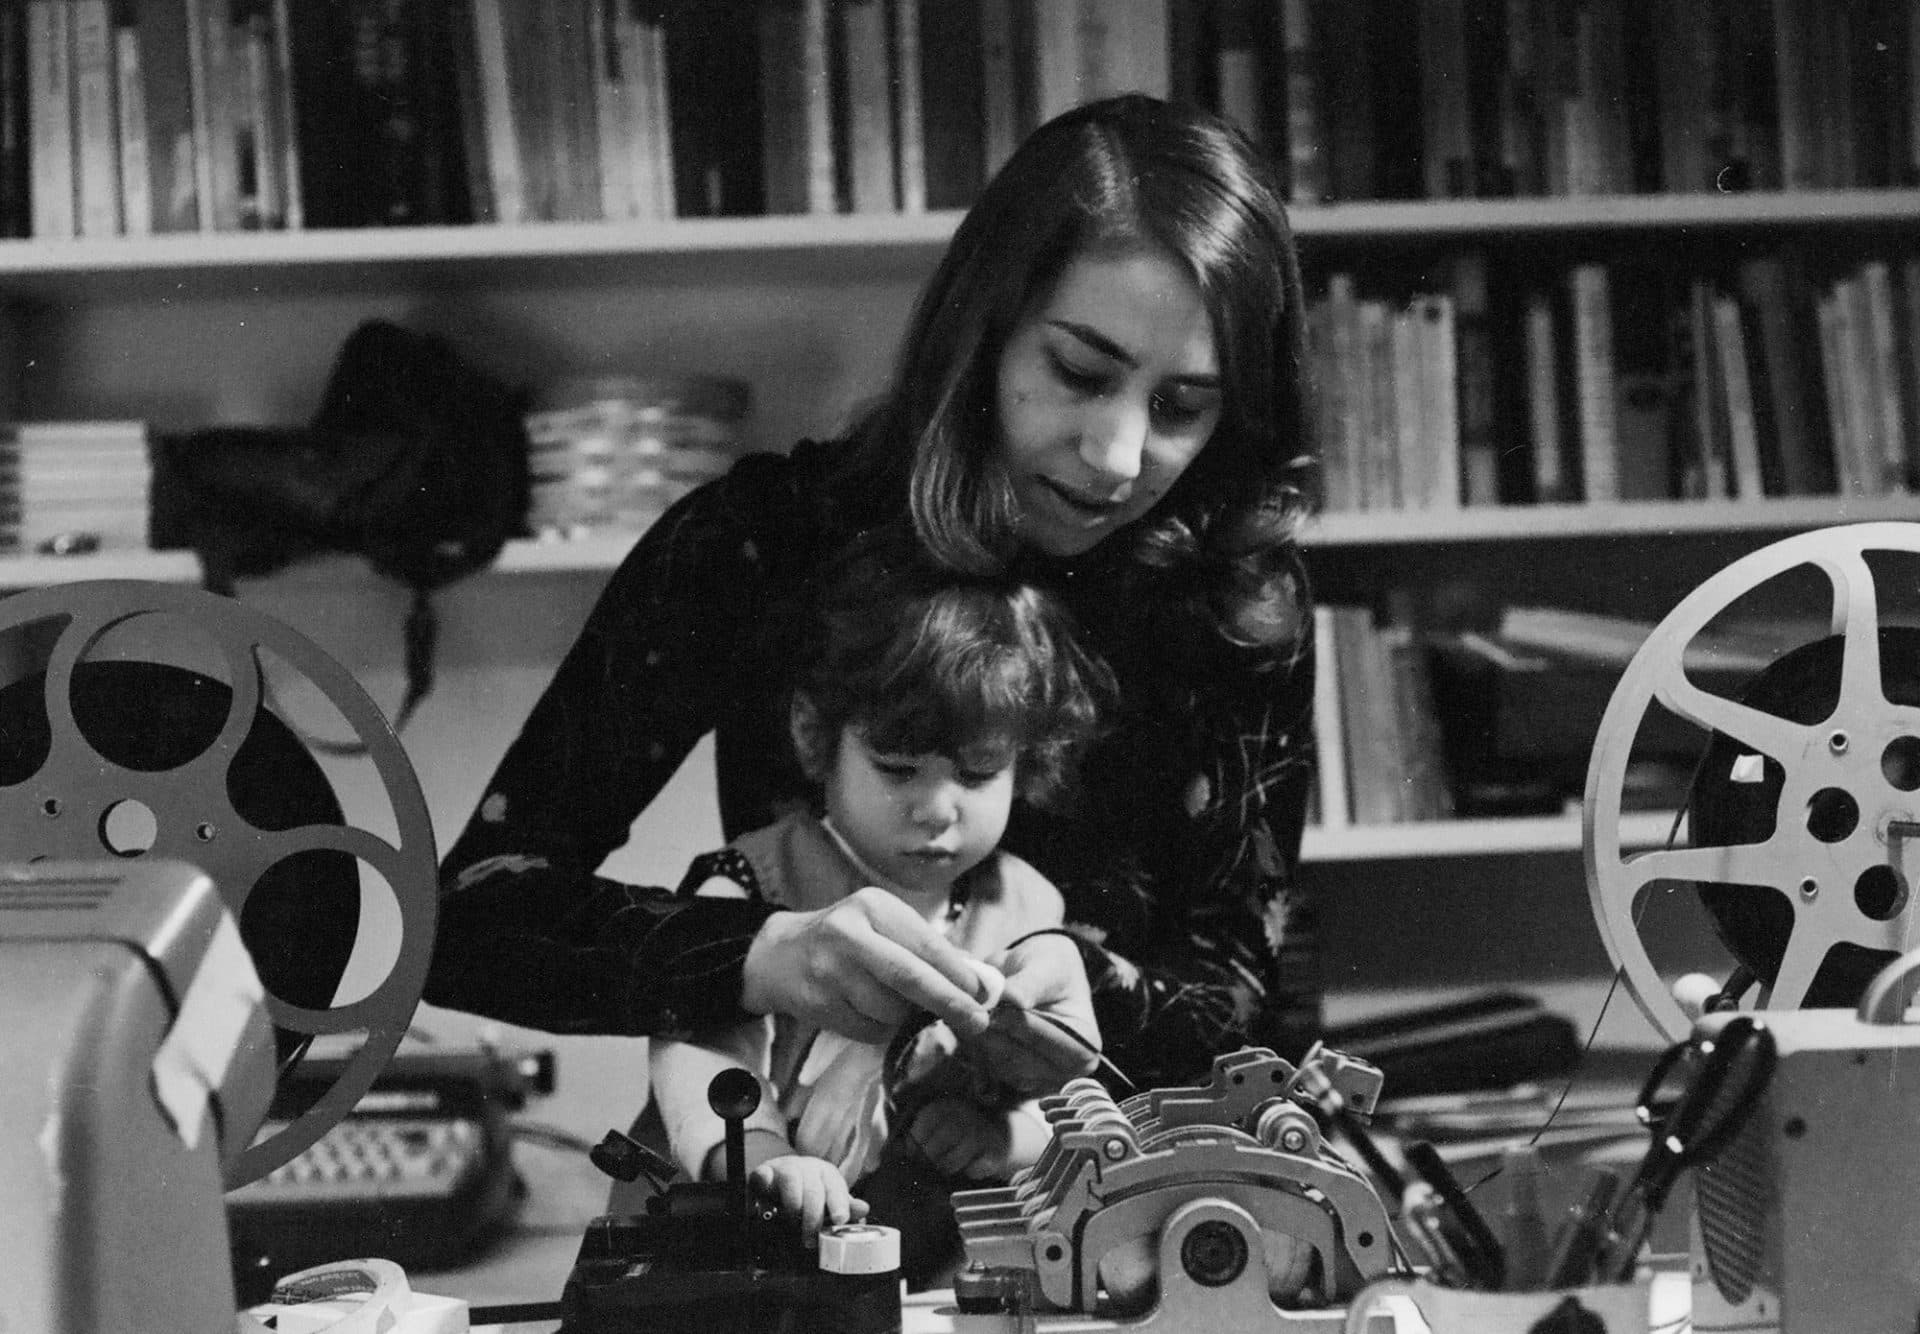 Joyce Chopra editing with her young child on her lap. (Courtesy Harvard Film Archive)